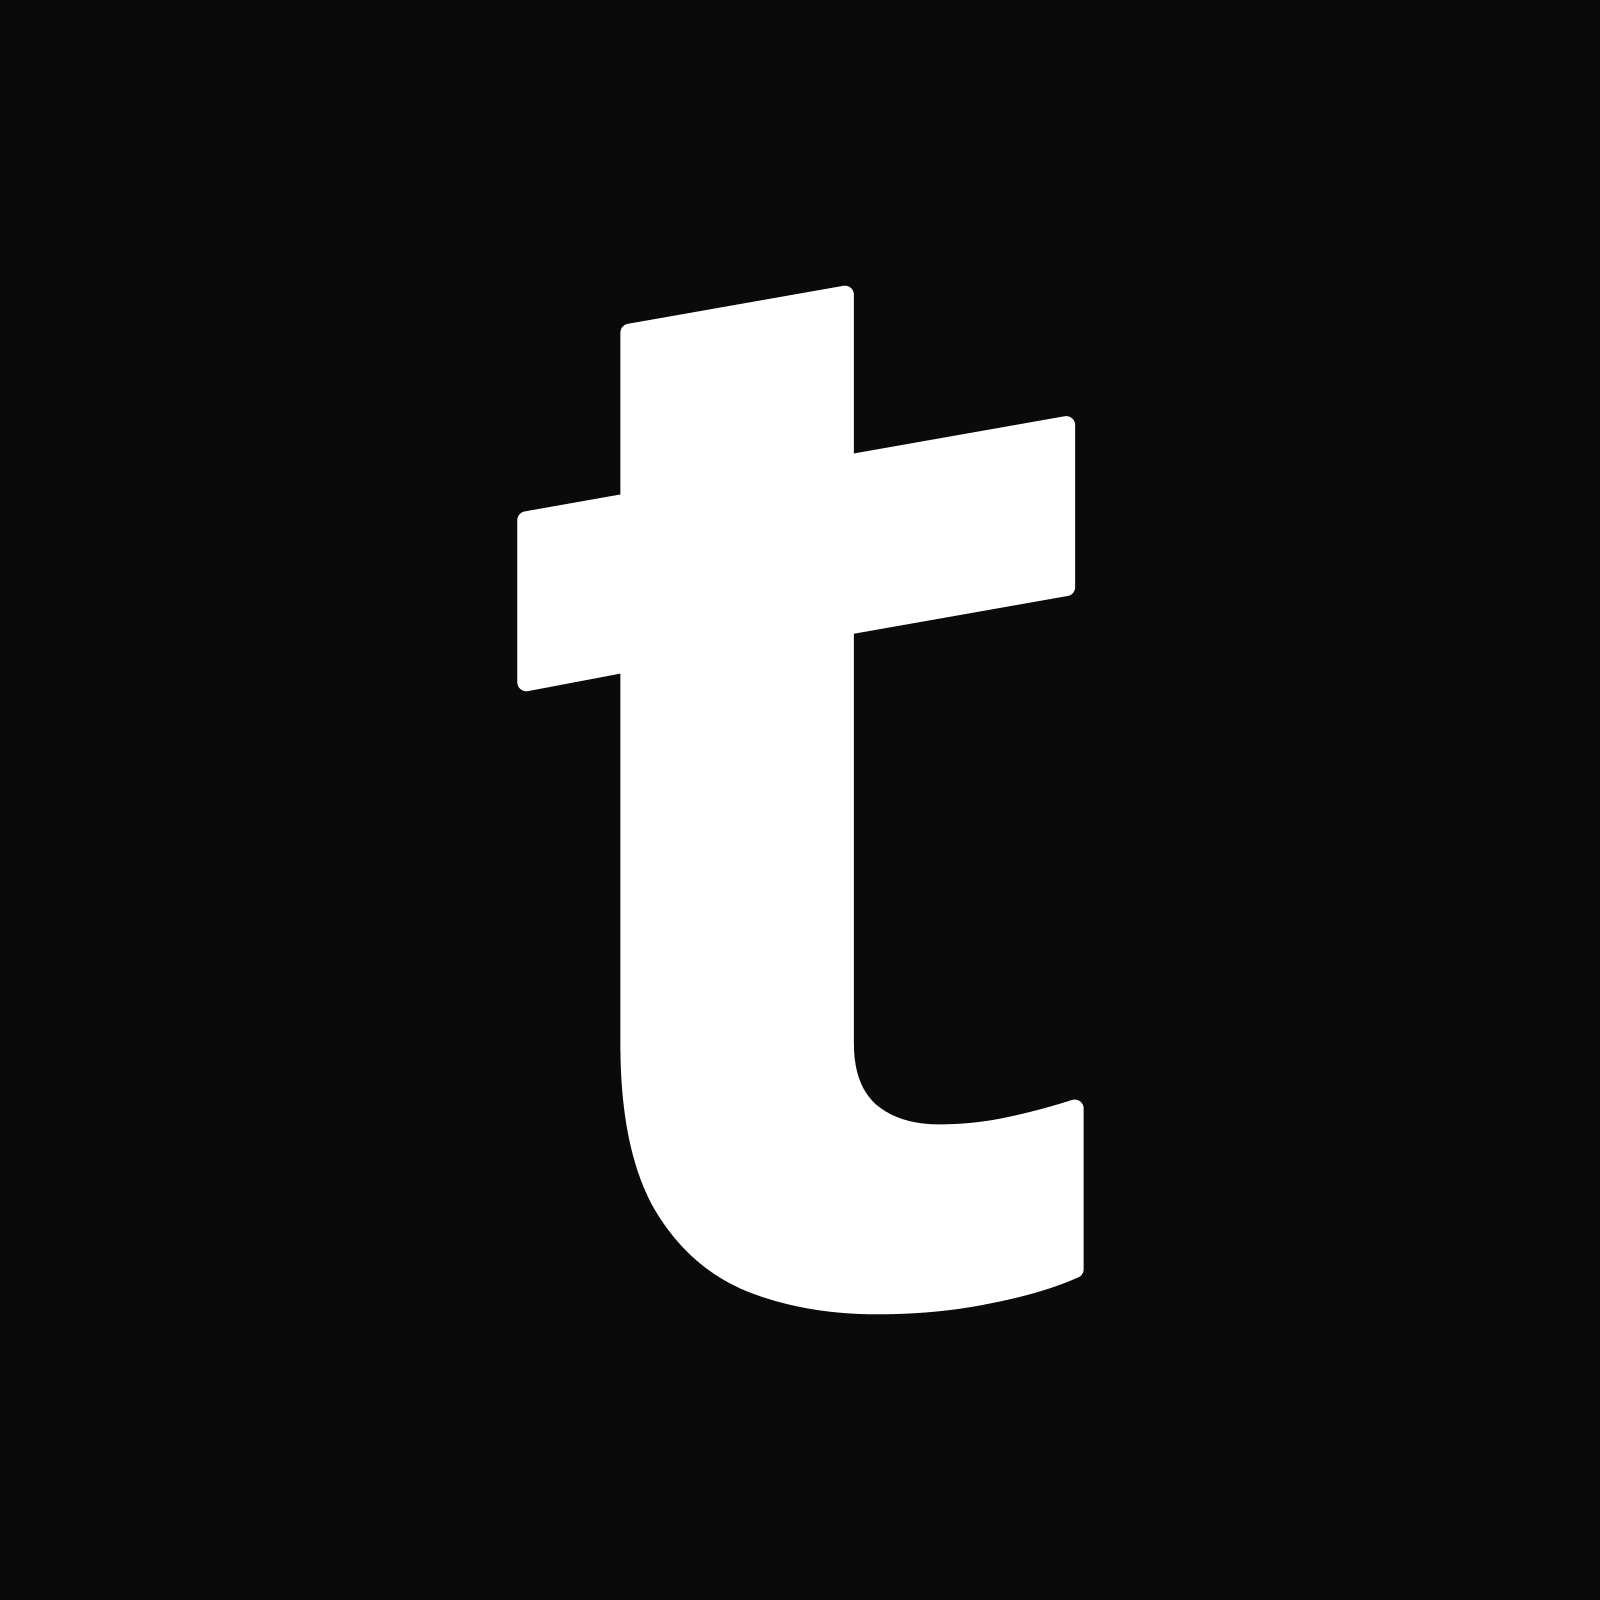 Tickete.co